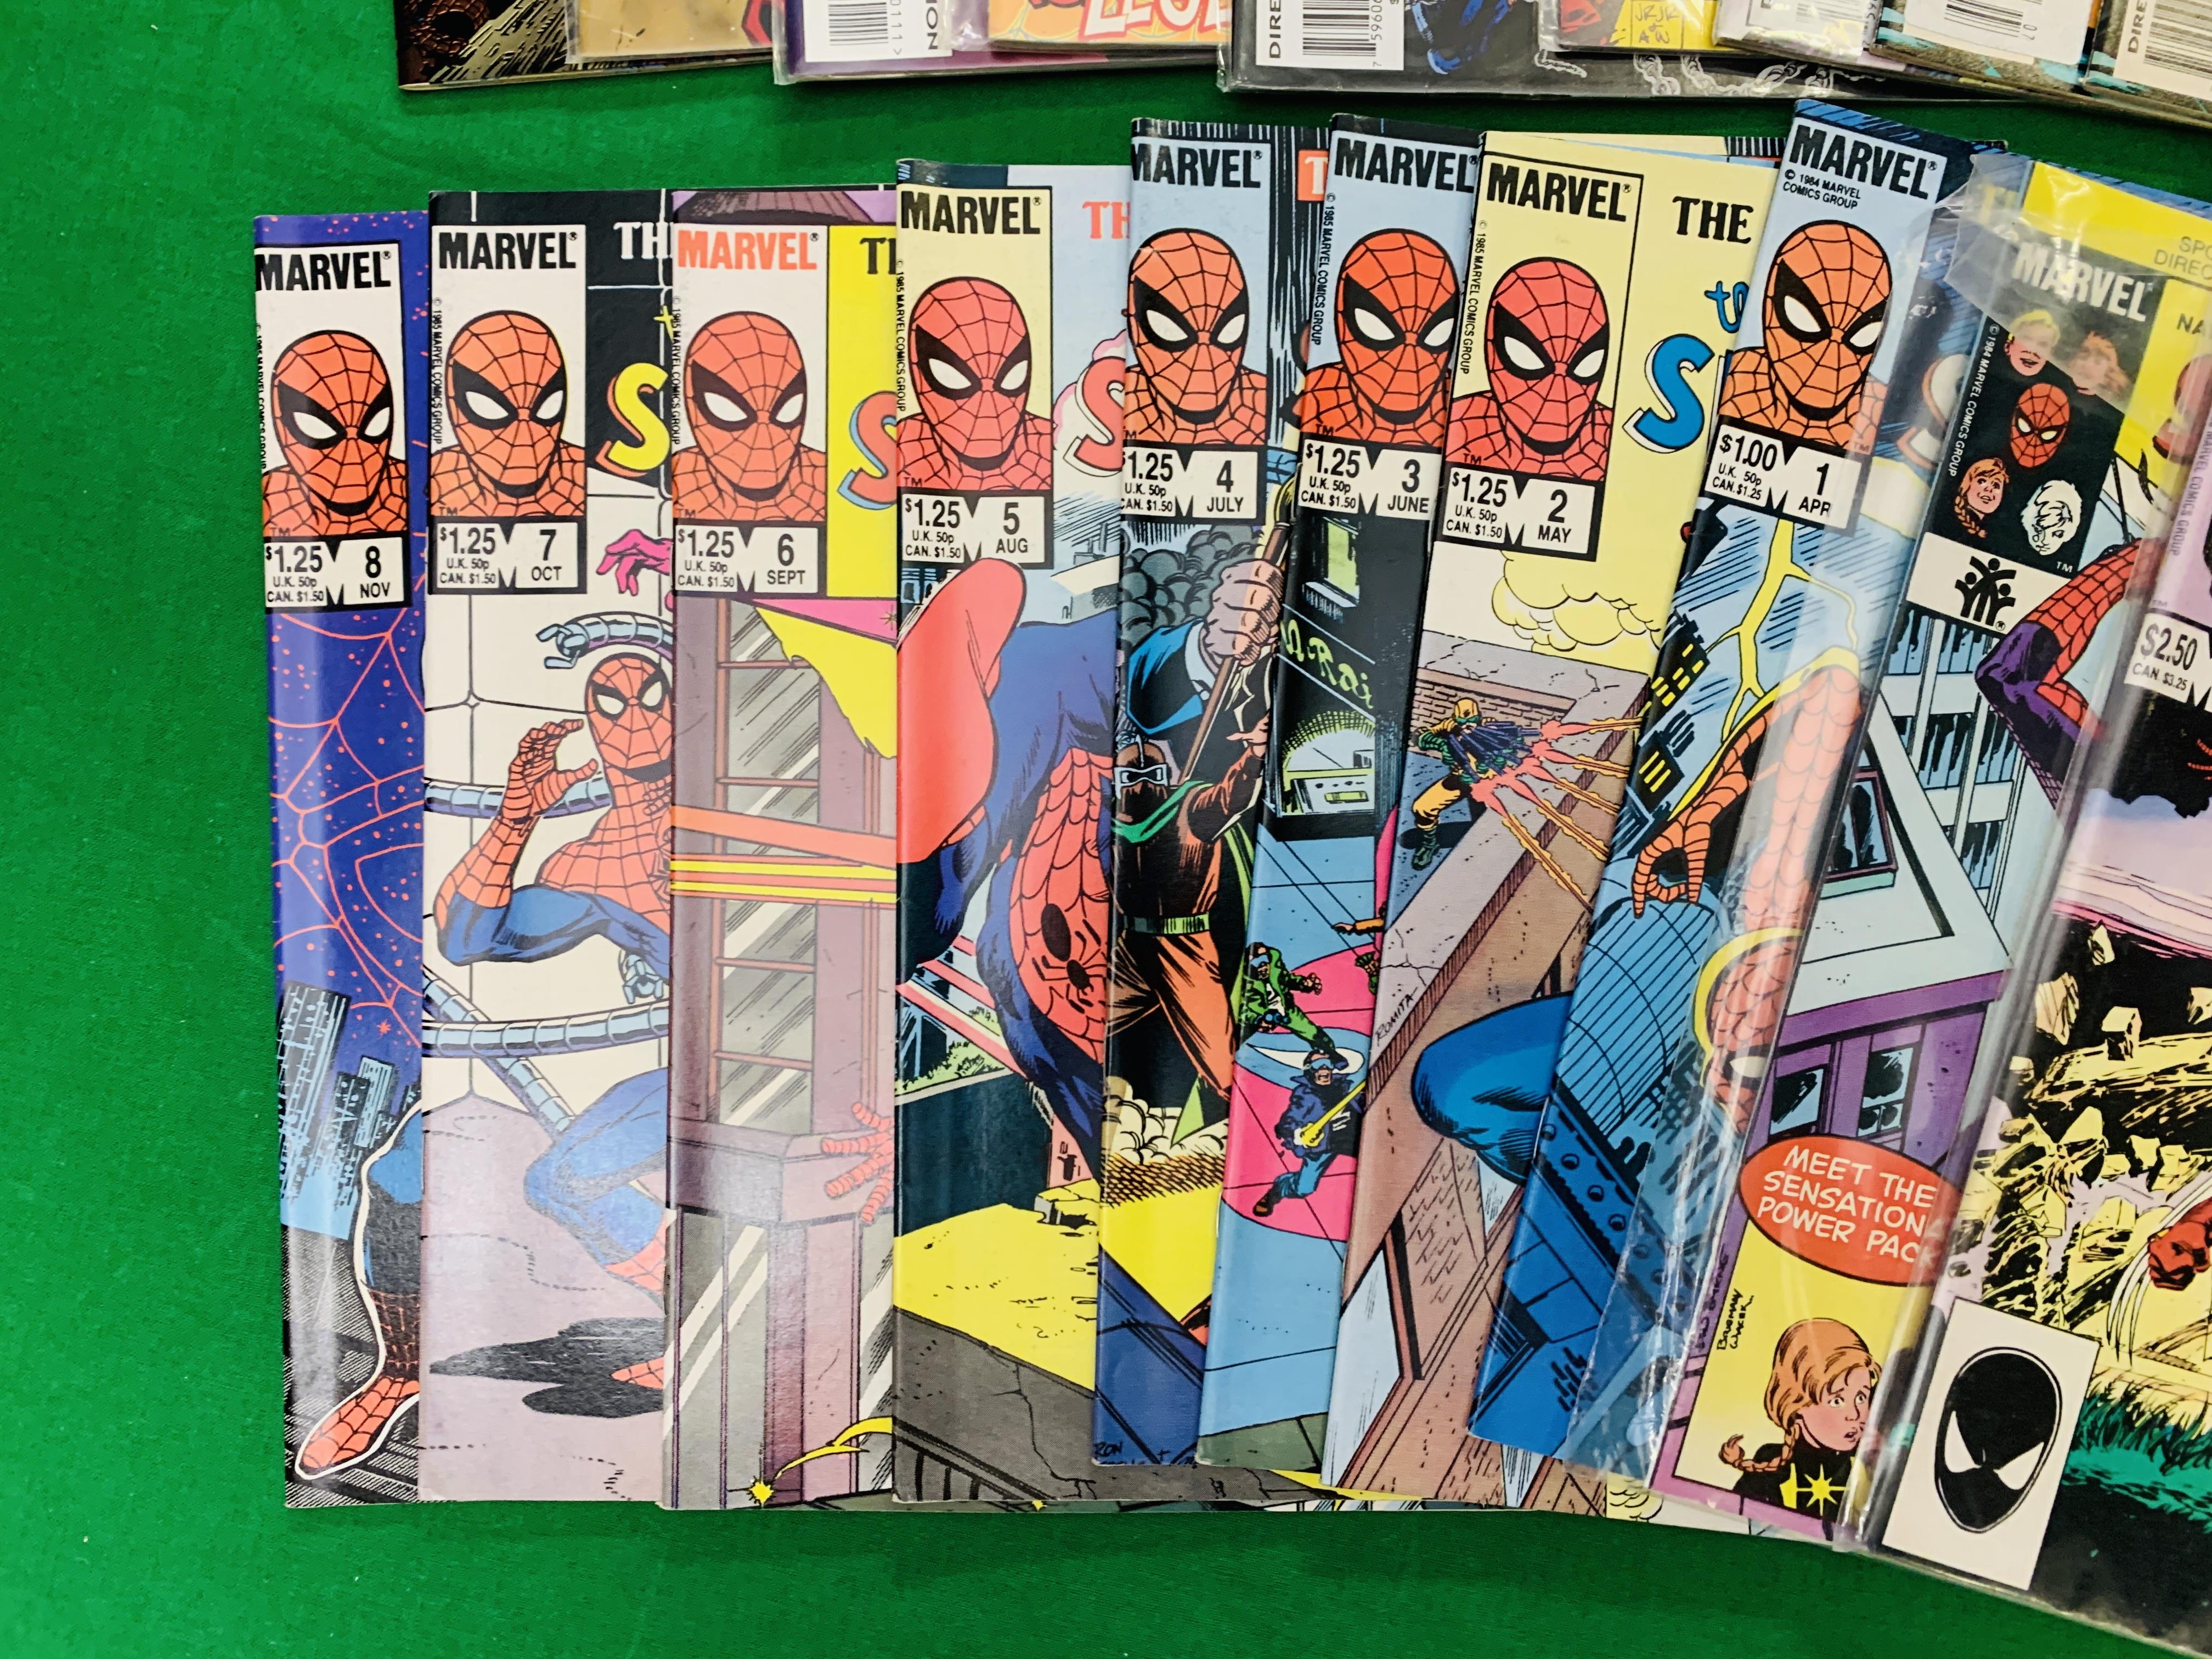 MARVEL COMICS A COLLECTION OF SPIDERMAN COMICS TO INCLUDE THE OFFICIAL MARVEL INDEX NO. - Image 3 of 5